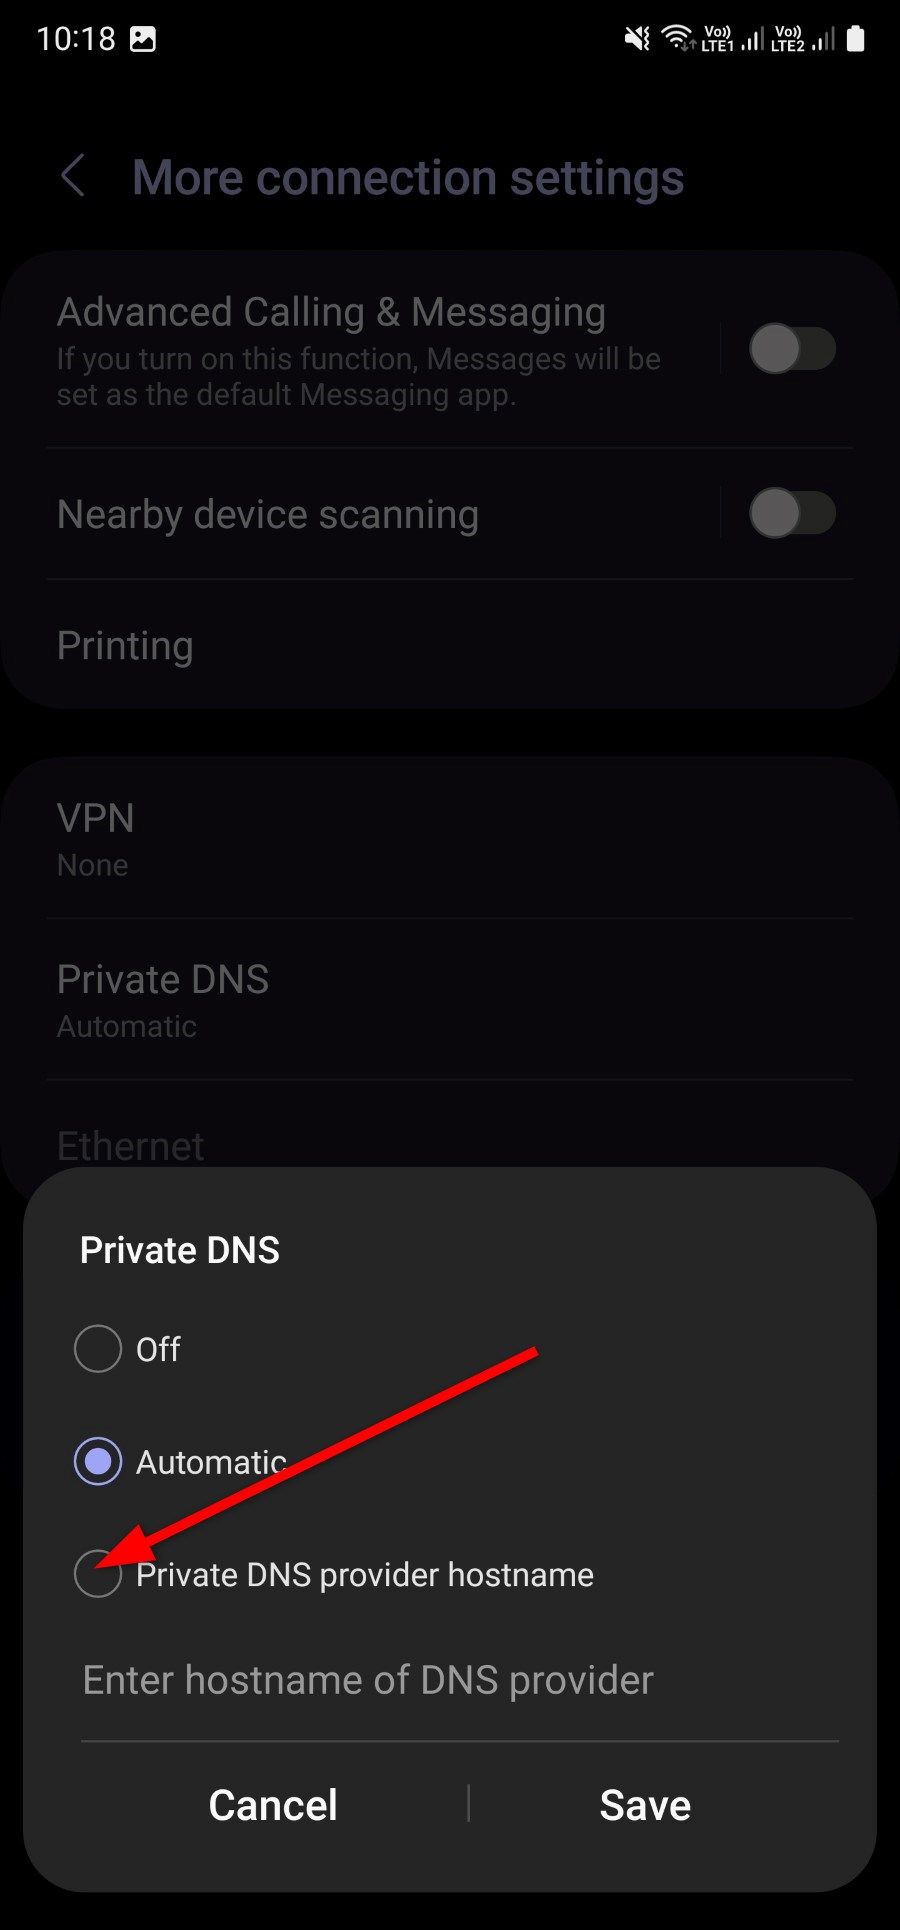 Option to enter private DNS provider hostname in Galaxy S22 Ultra